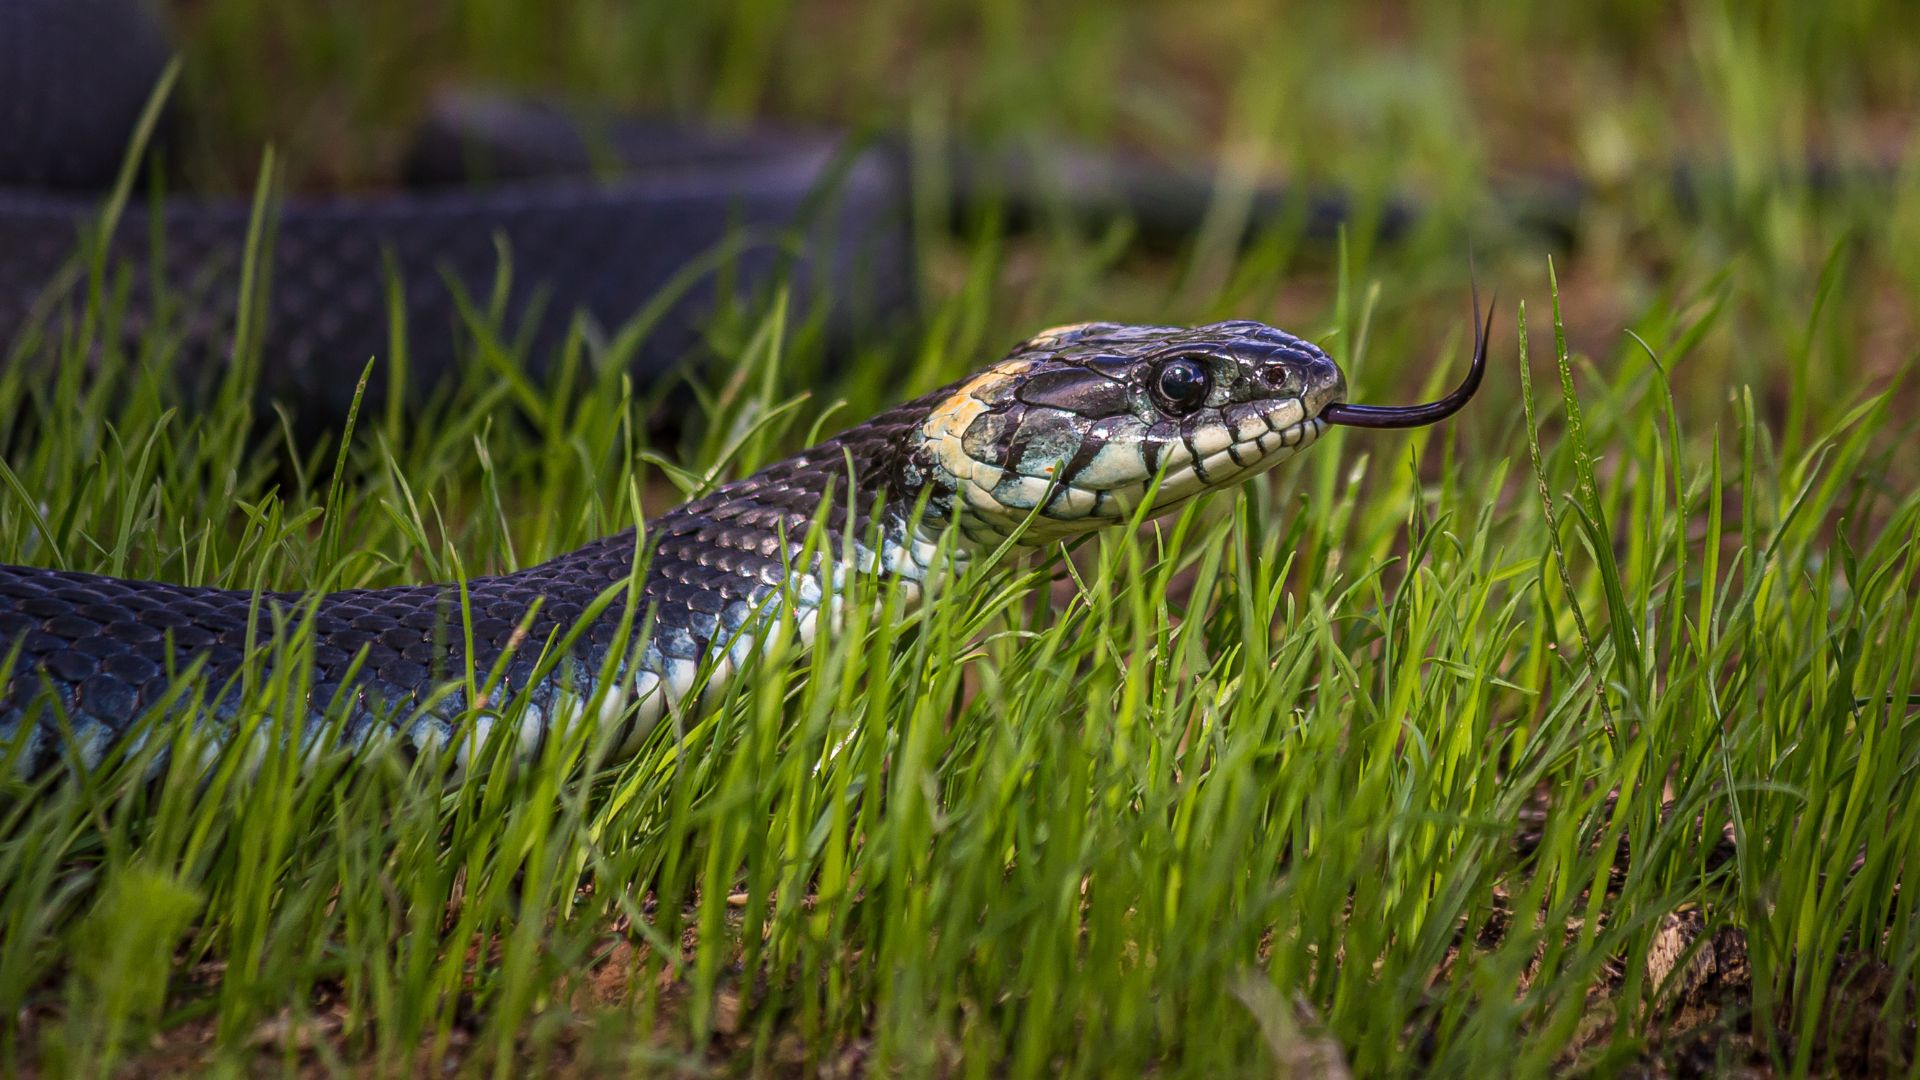 Here’s The Lawn Care Mistake That’s Bringing All Those Snakes To Your Yard